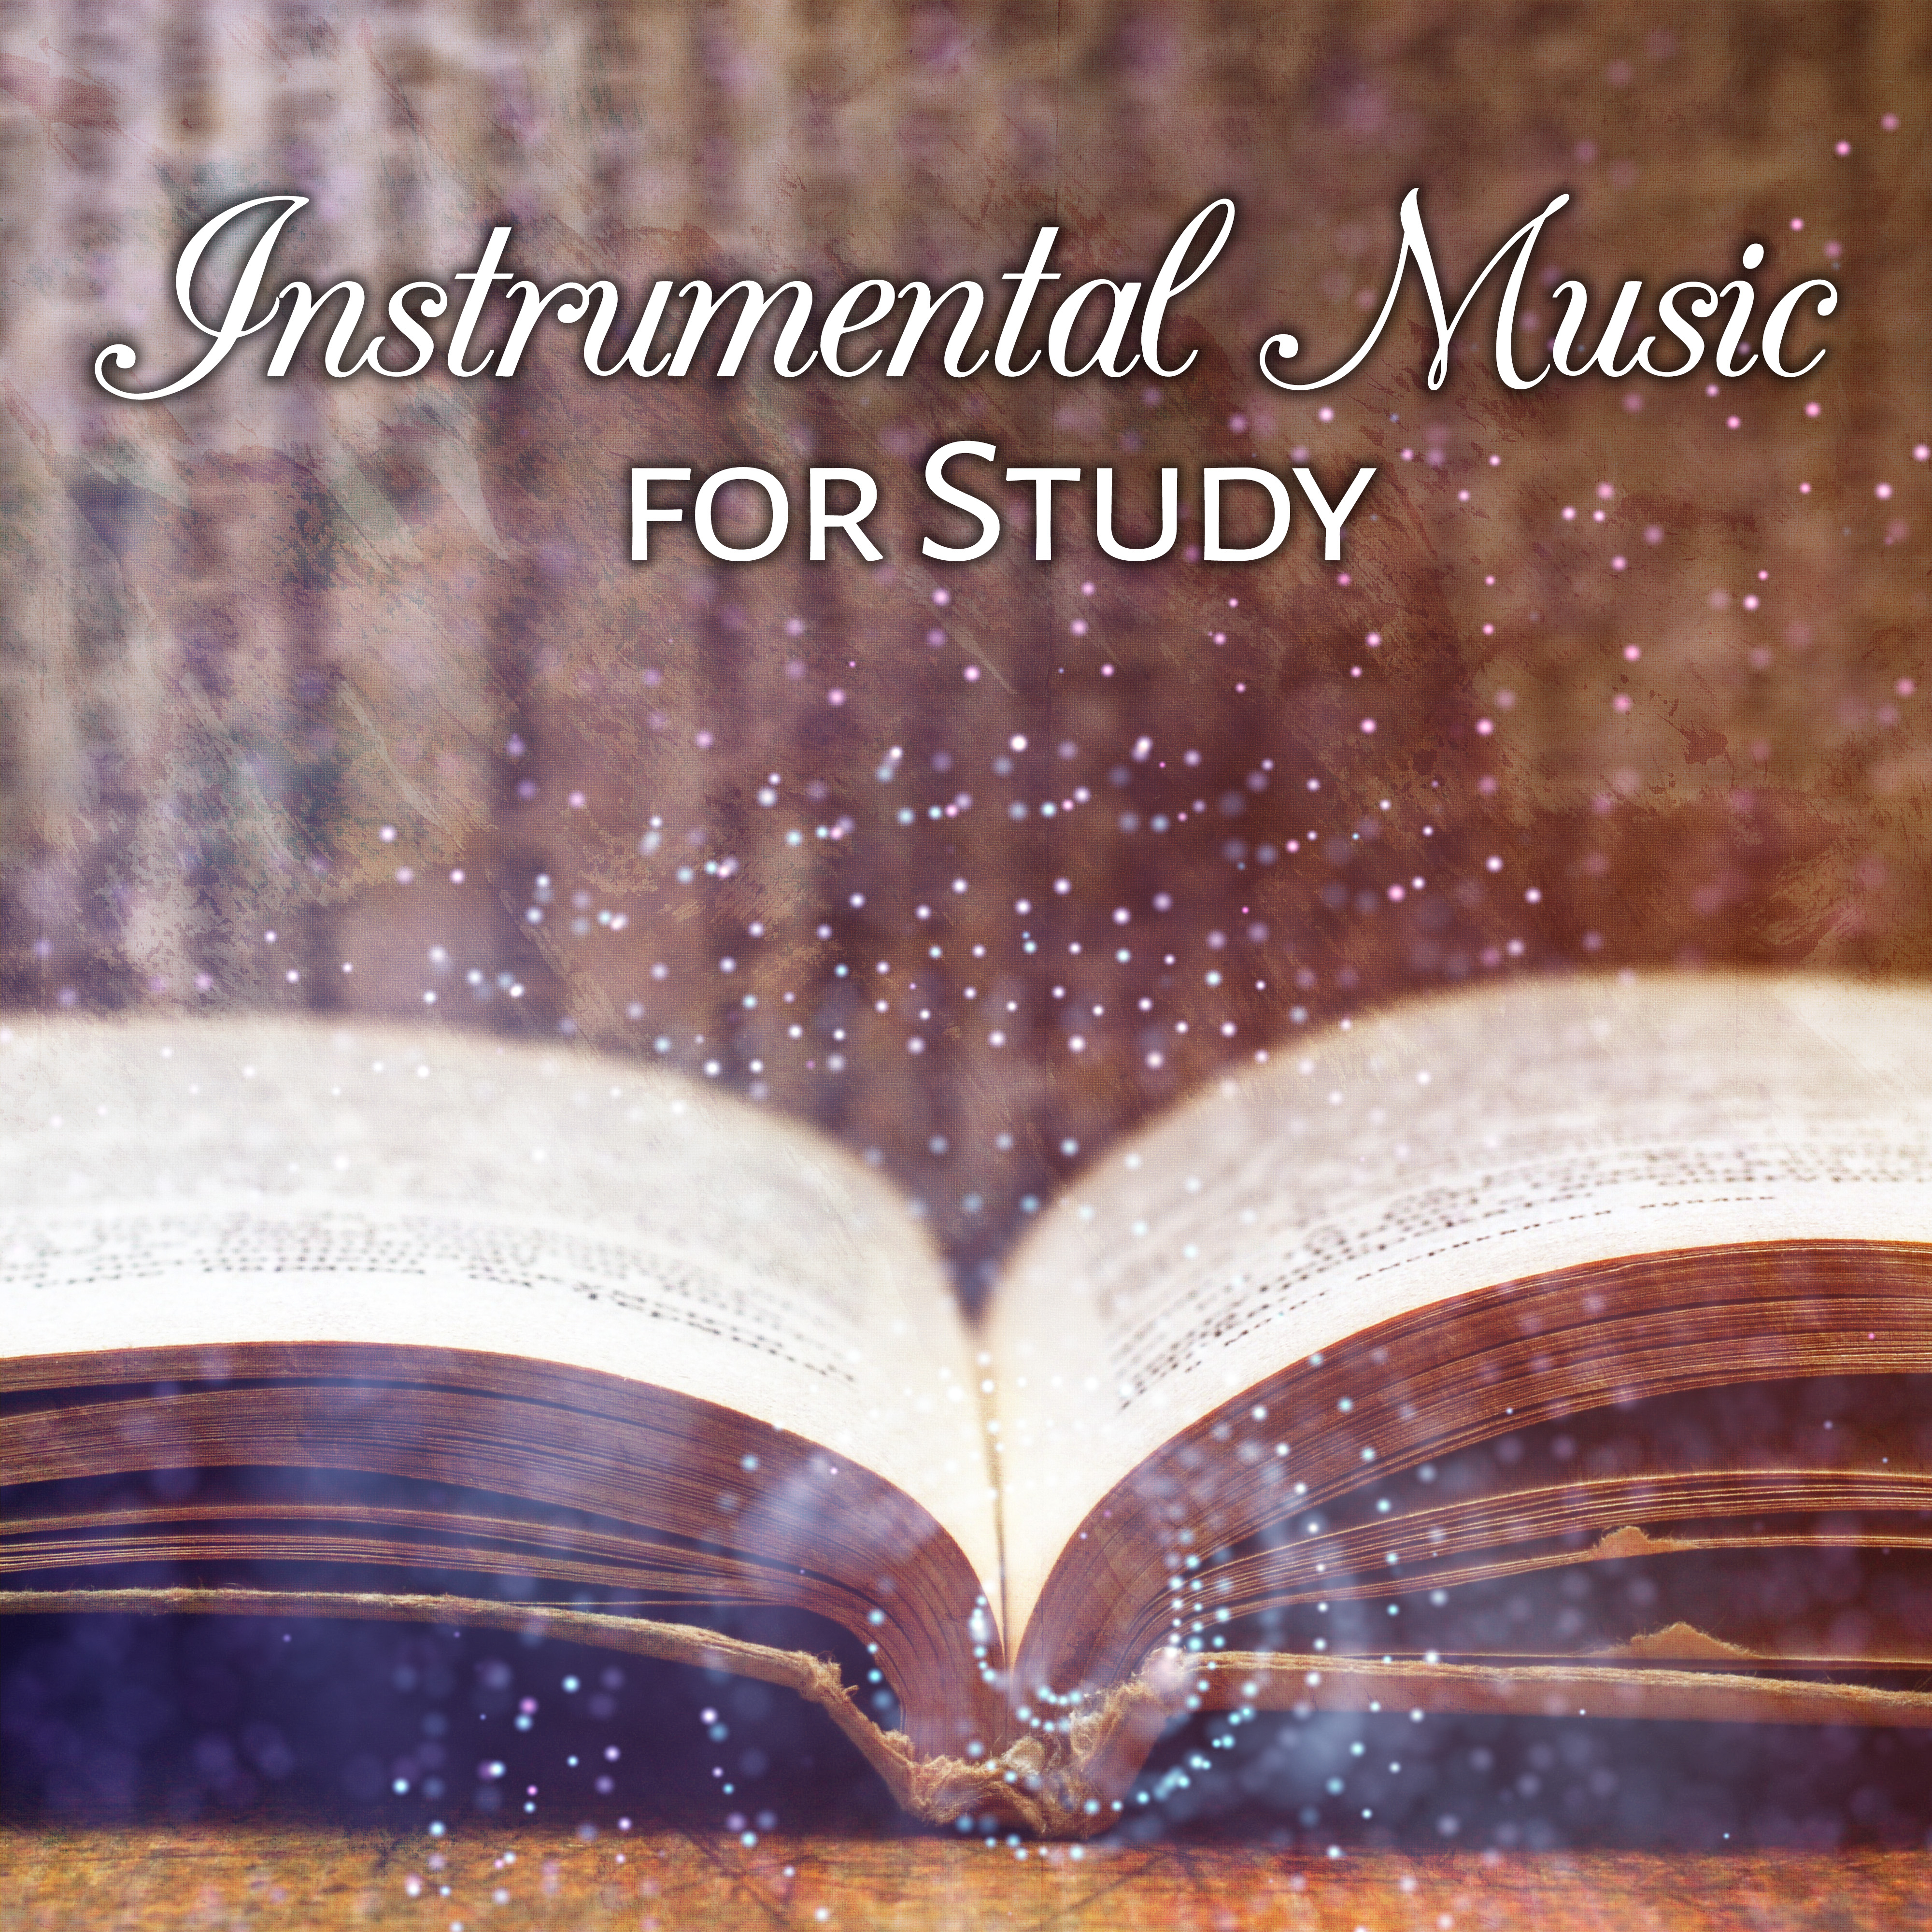 Instrumental Music for Study  Serenity New Age for Study, Music for Learning, Reading, Keep Focus